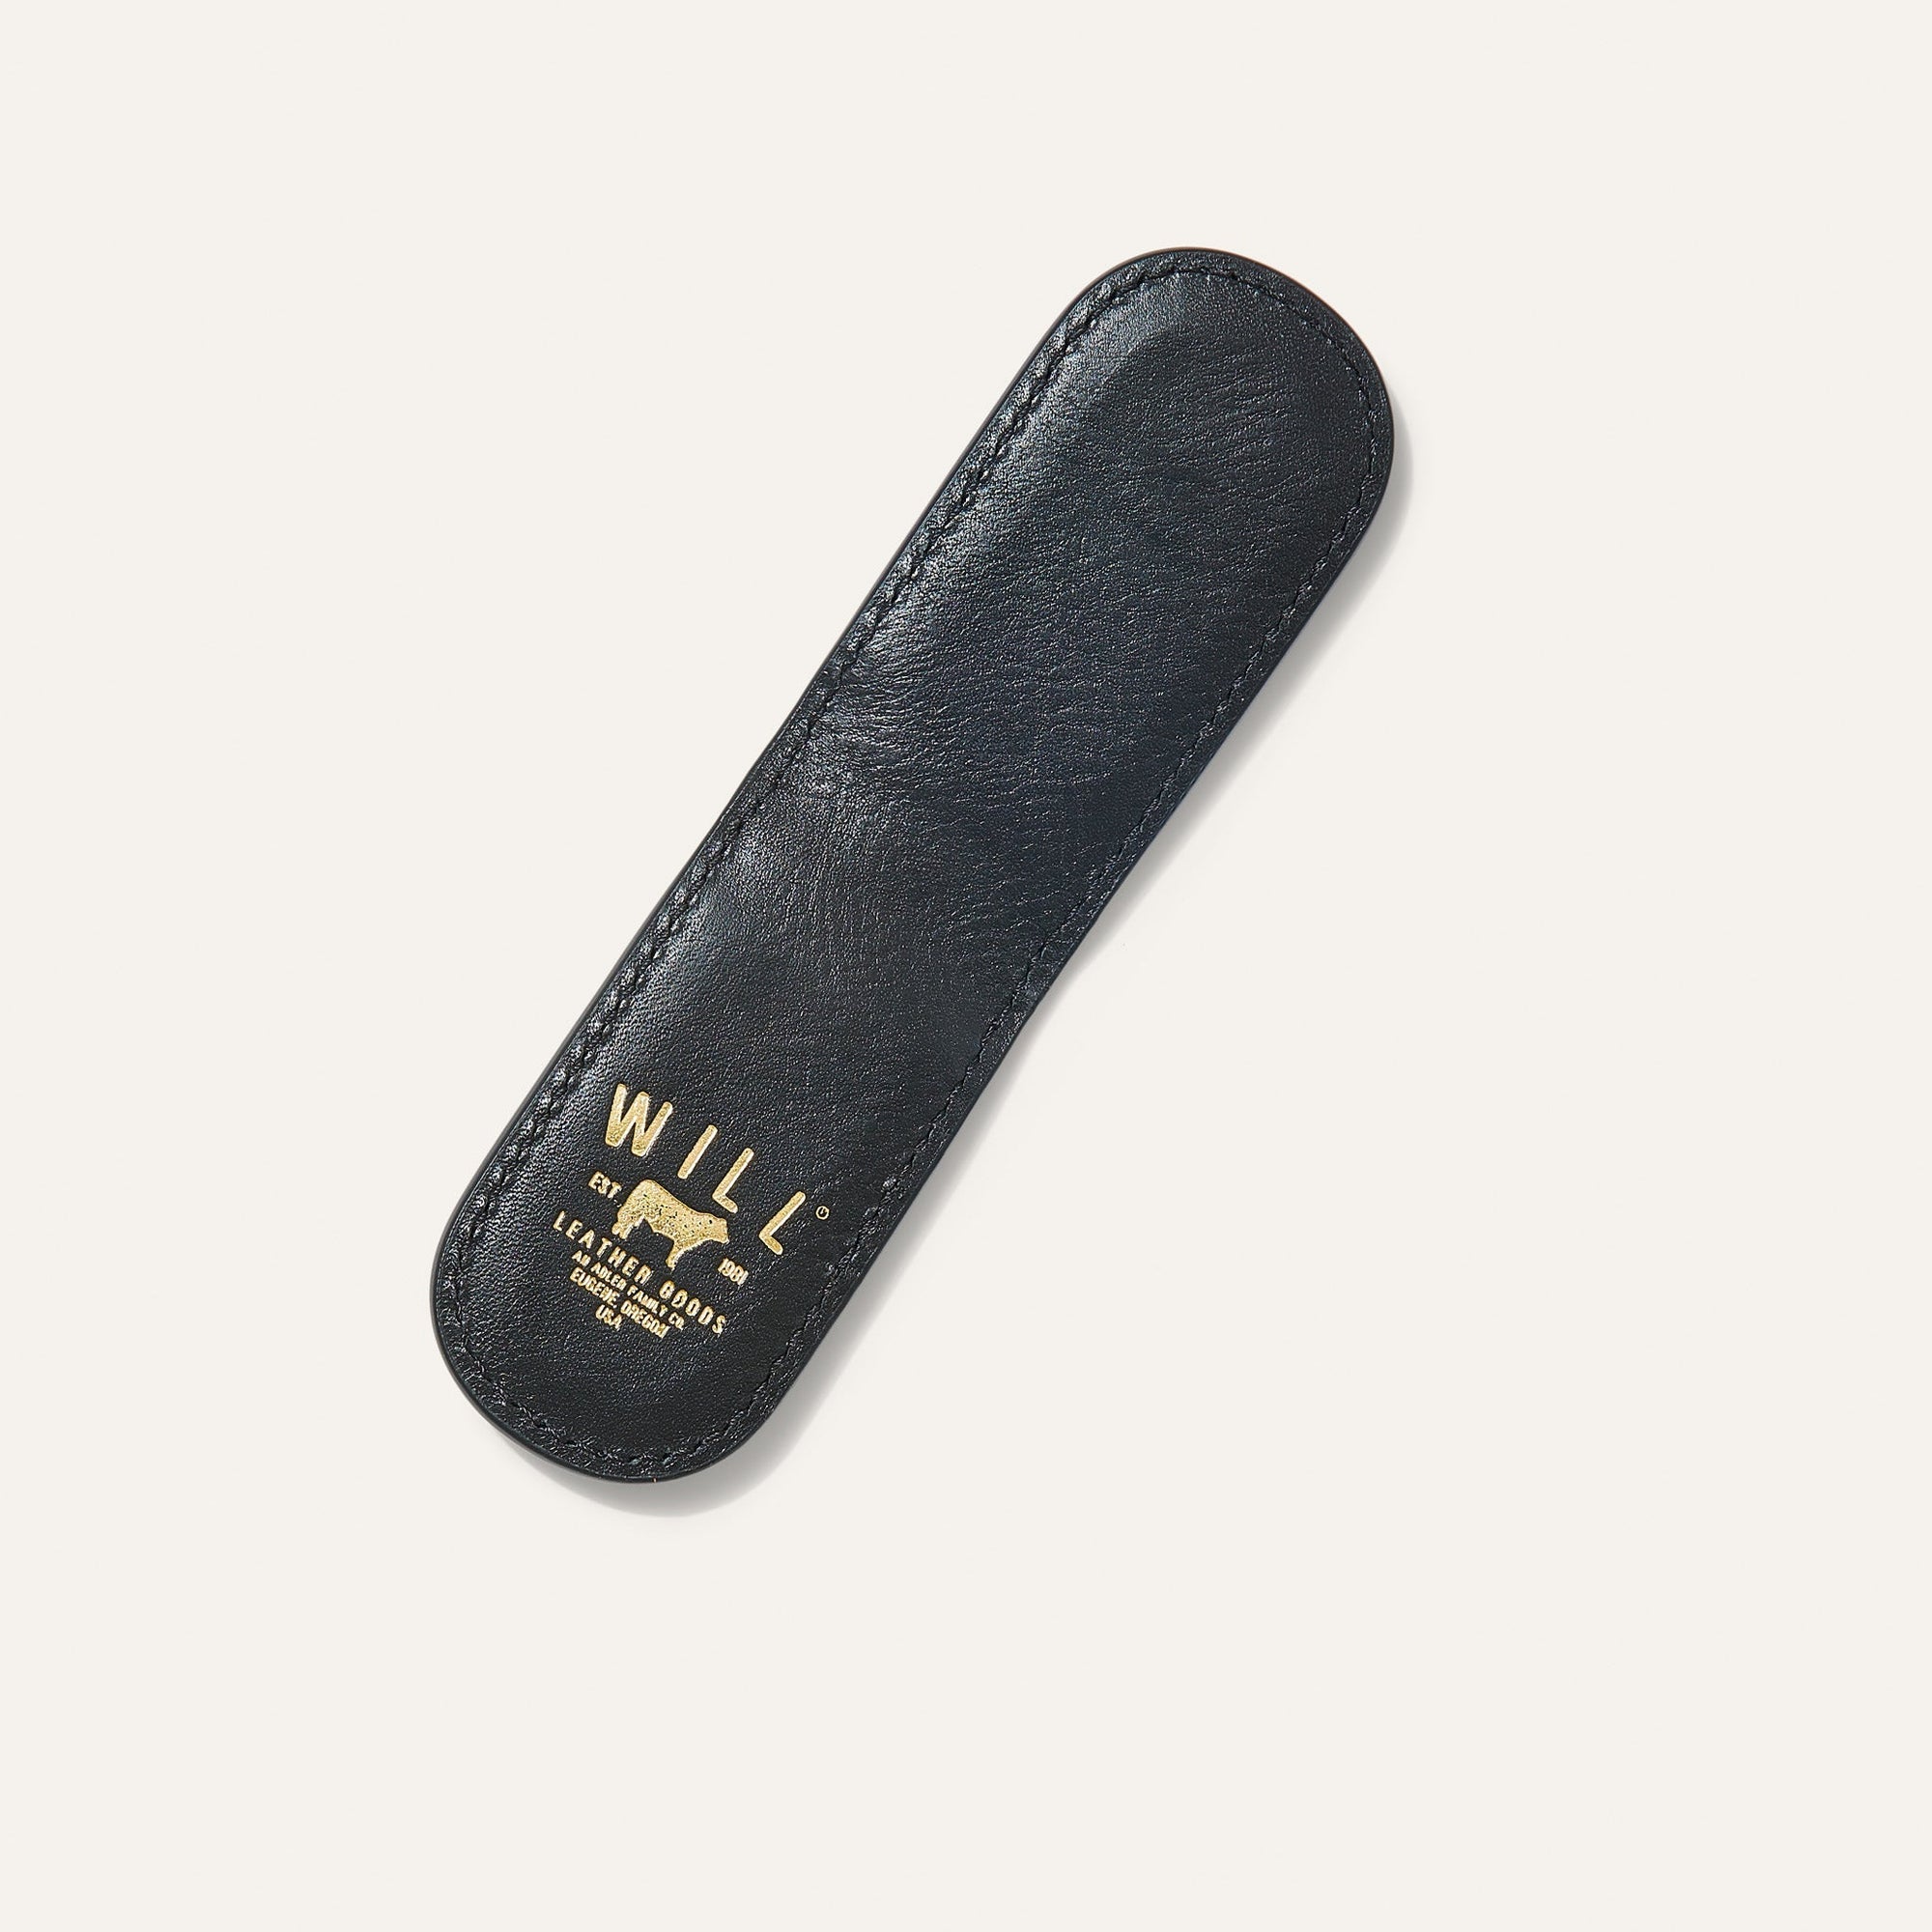 Classic Leather Money Clip in Black by Will Leather Goods